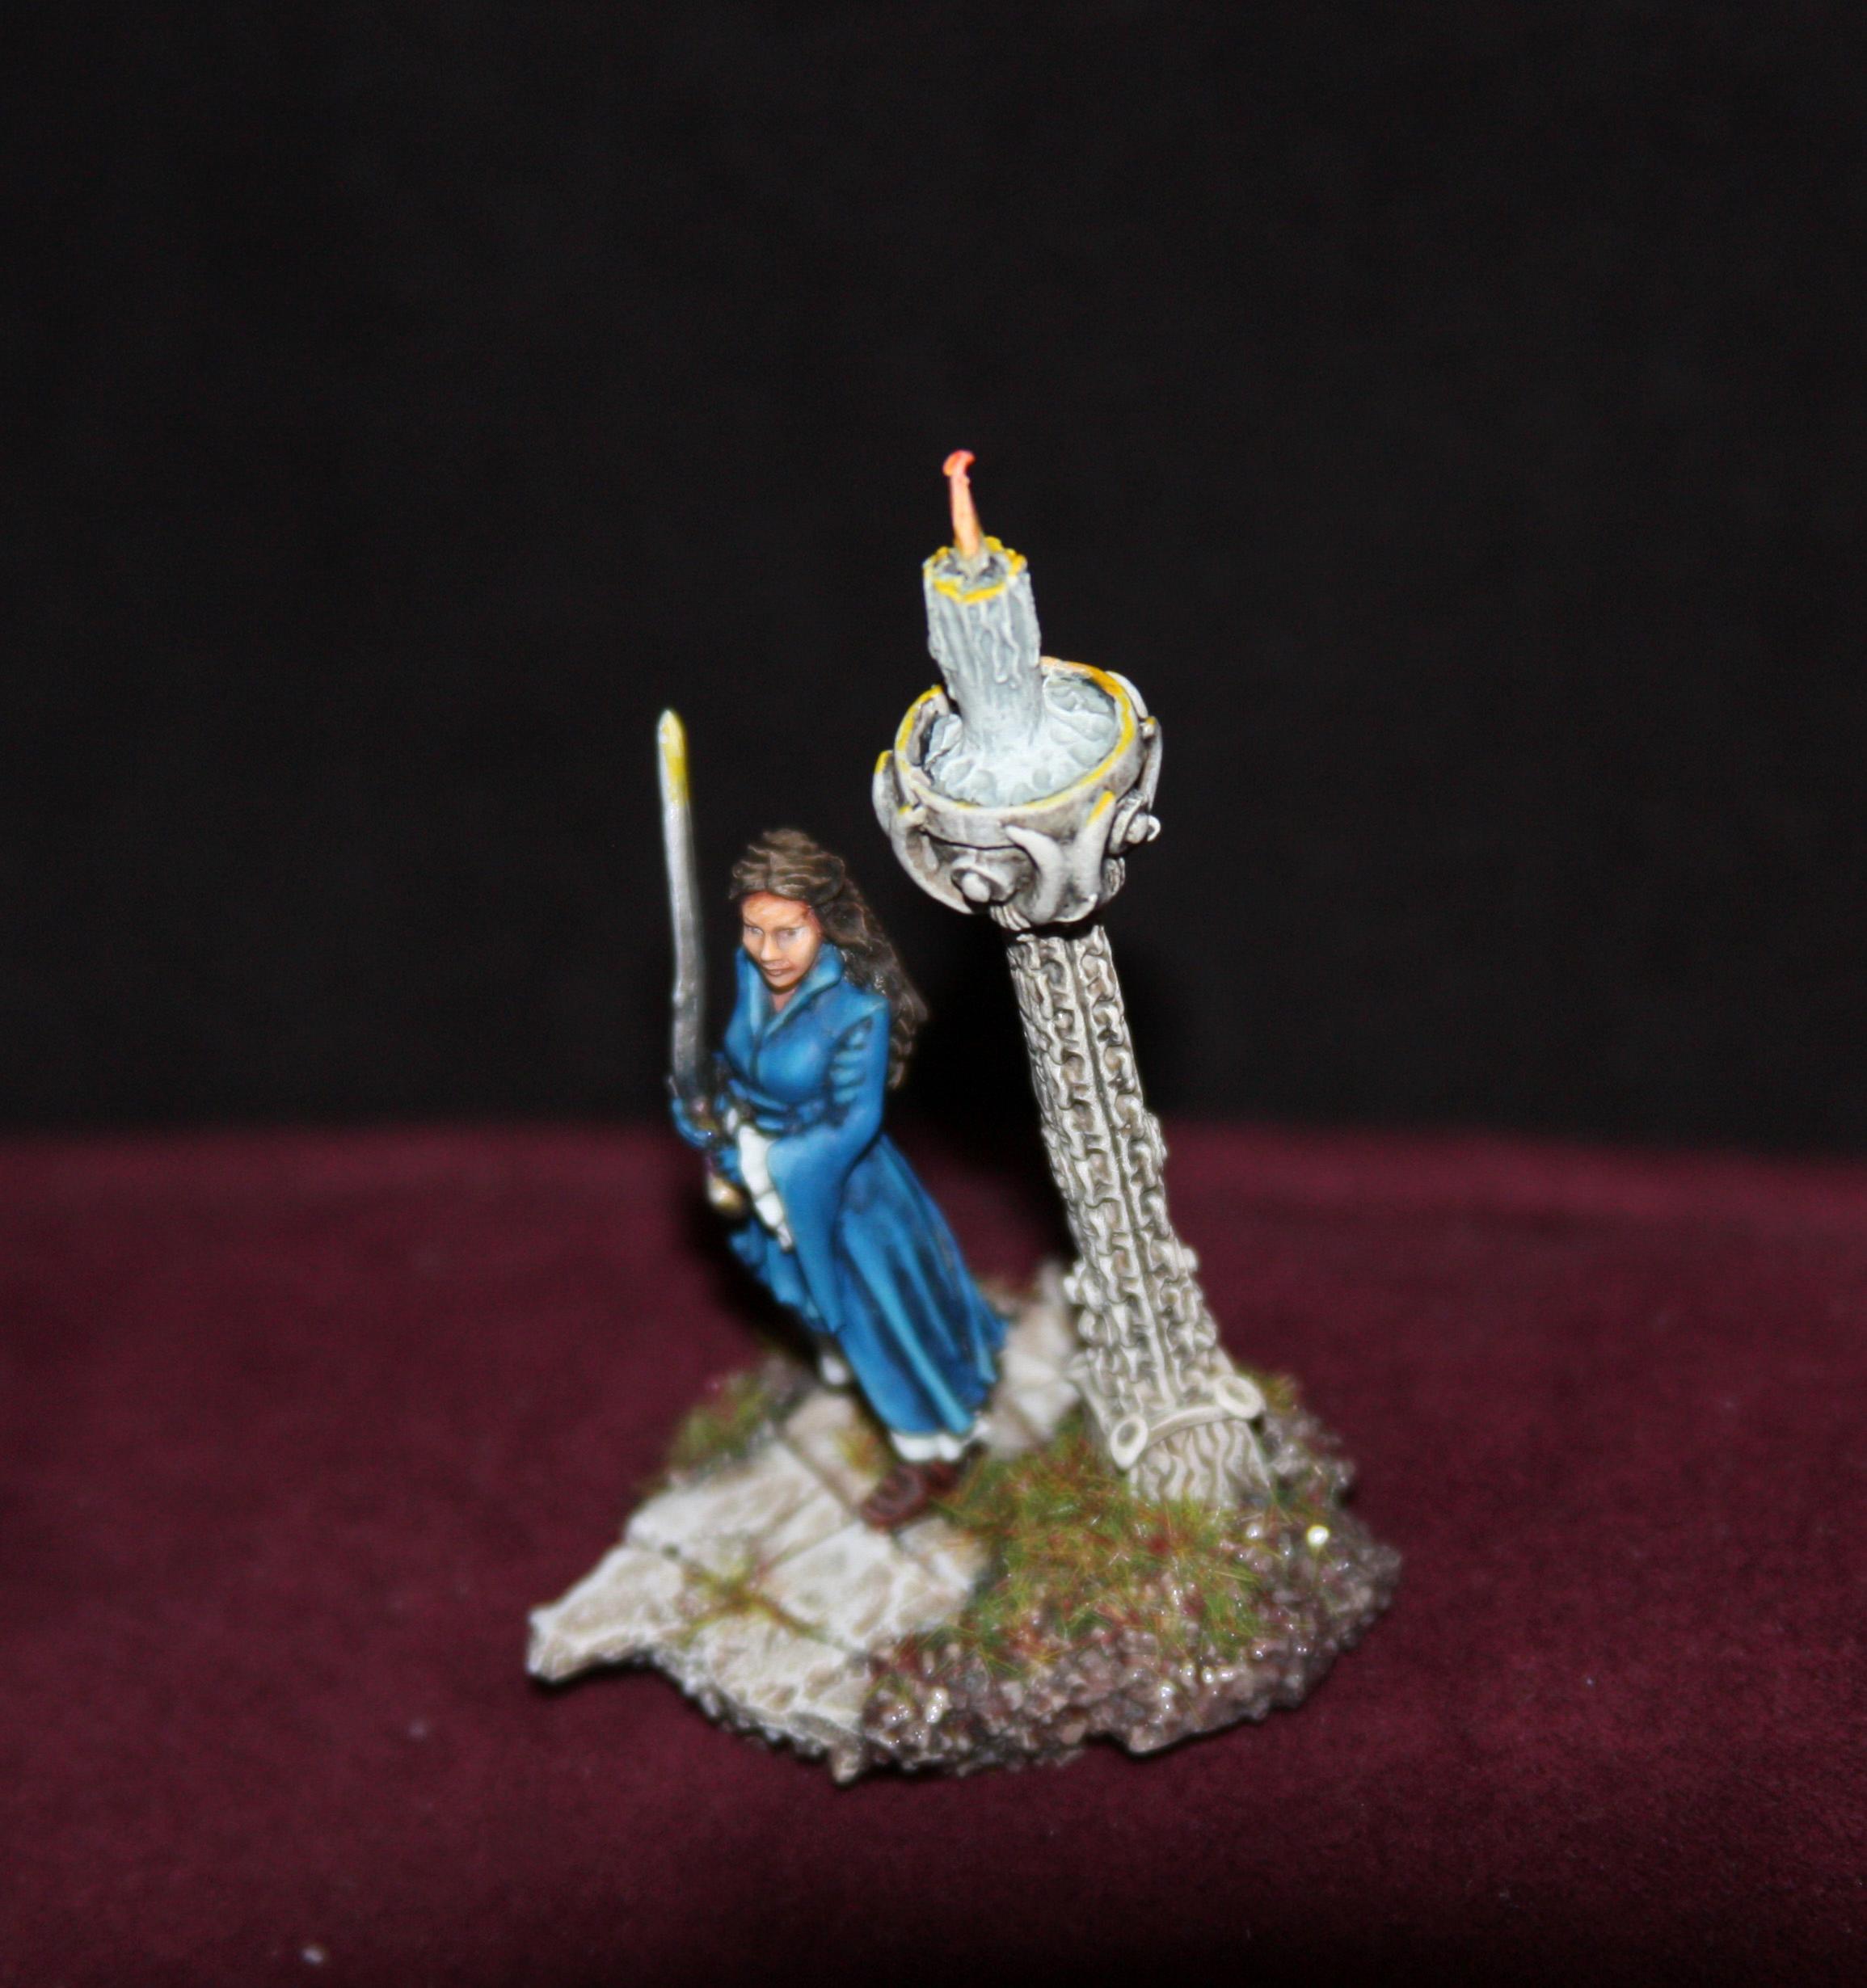 Arwen, Blending, Candle, Cloth, Elves, Female, Fire, Light, Lord, Of, Rings, Source, Terrain, The